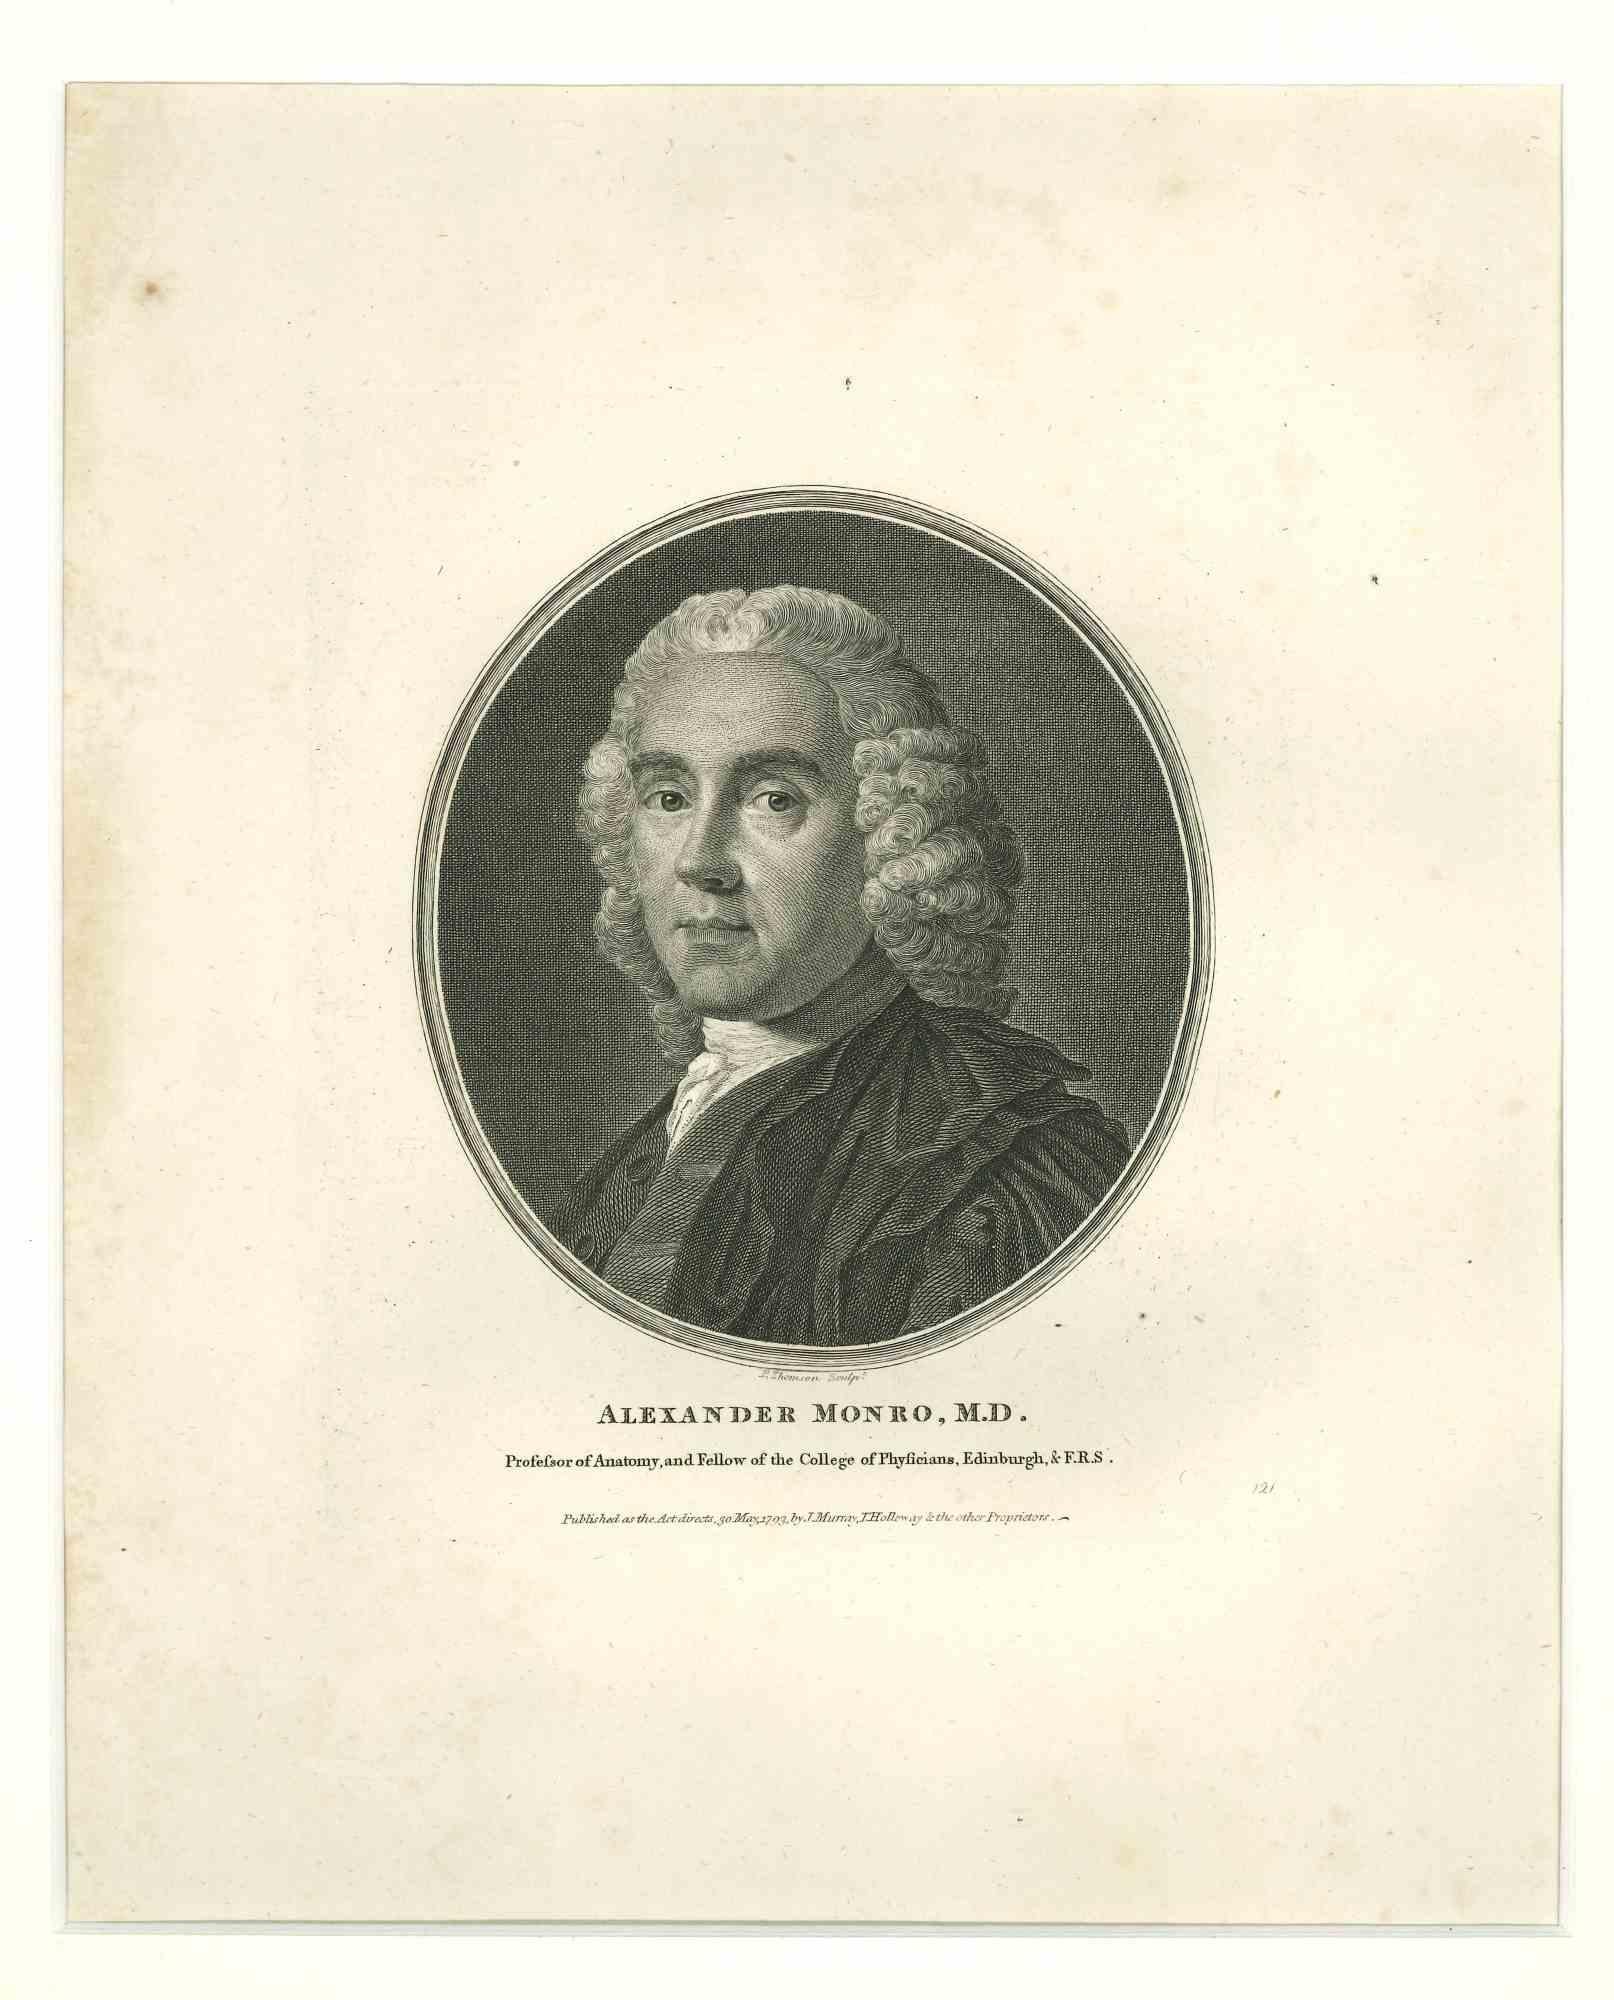 Portrait of Alexander Monro is an original etching realized by P. Thomson in 1793.

Good condition, mounted on a white cardboard passpartout ( 49x34 cm).

The portrait represent Alexander Monro, Professor of Anatomy at Edinburgh College.

